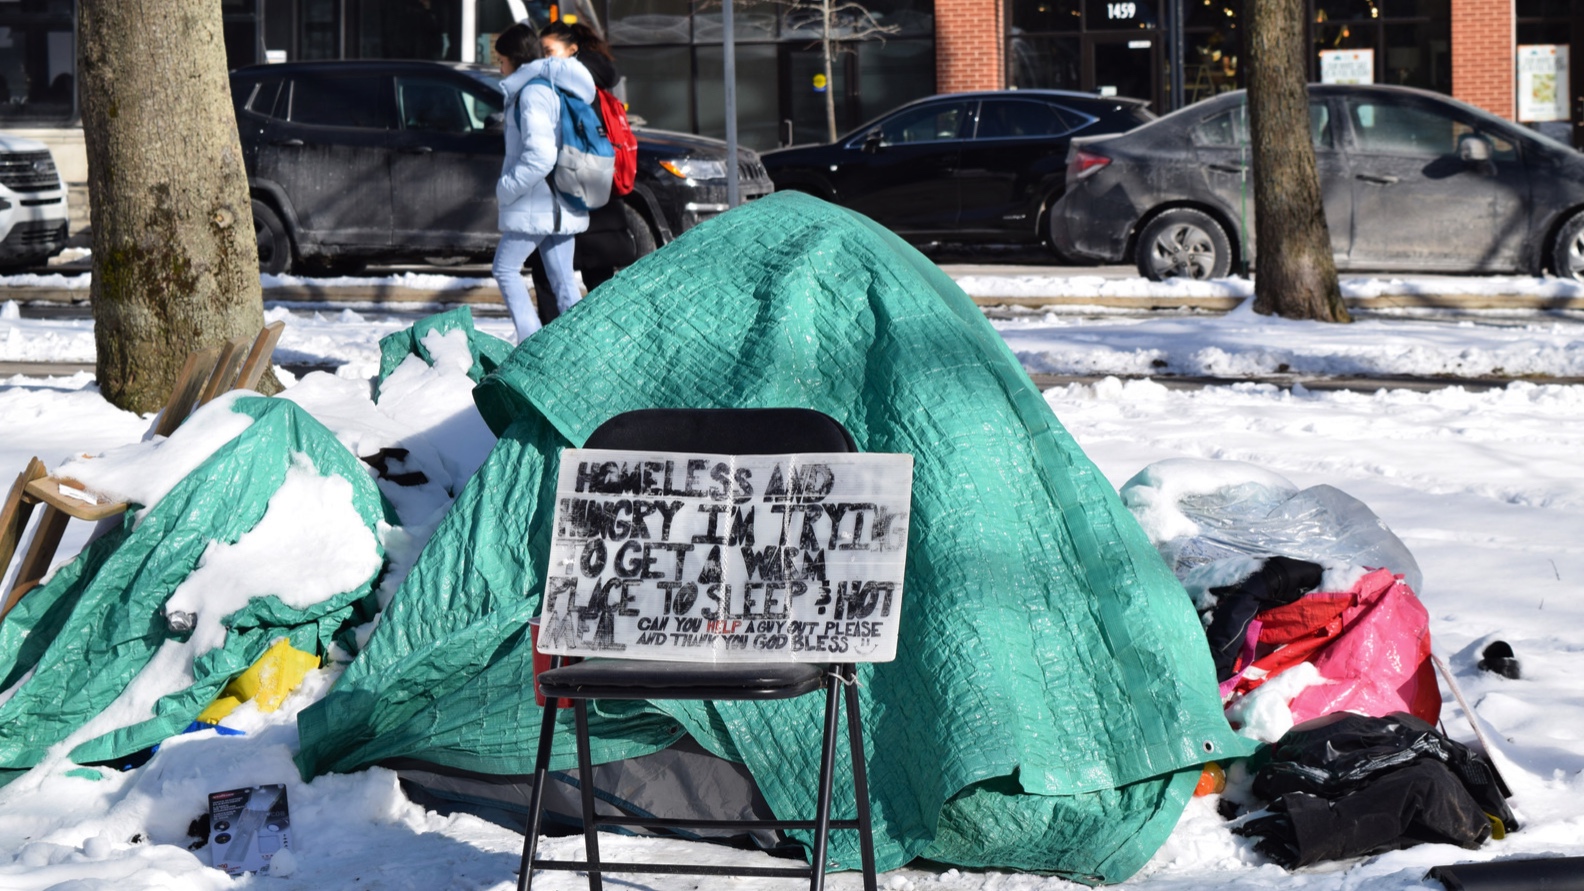 Tent covered in green tarp sits in the snow-covered park as pedestrians walk by on the pavement behind it. A white signed propped up on a black chair reads: “Homeless and hungry I’m trying to get a warm place to sleep & hot meal. Can you help a guy out please and thank you God bless.”